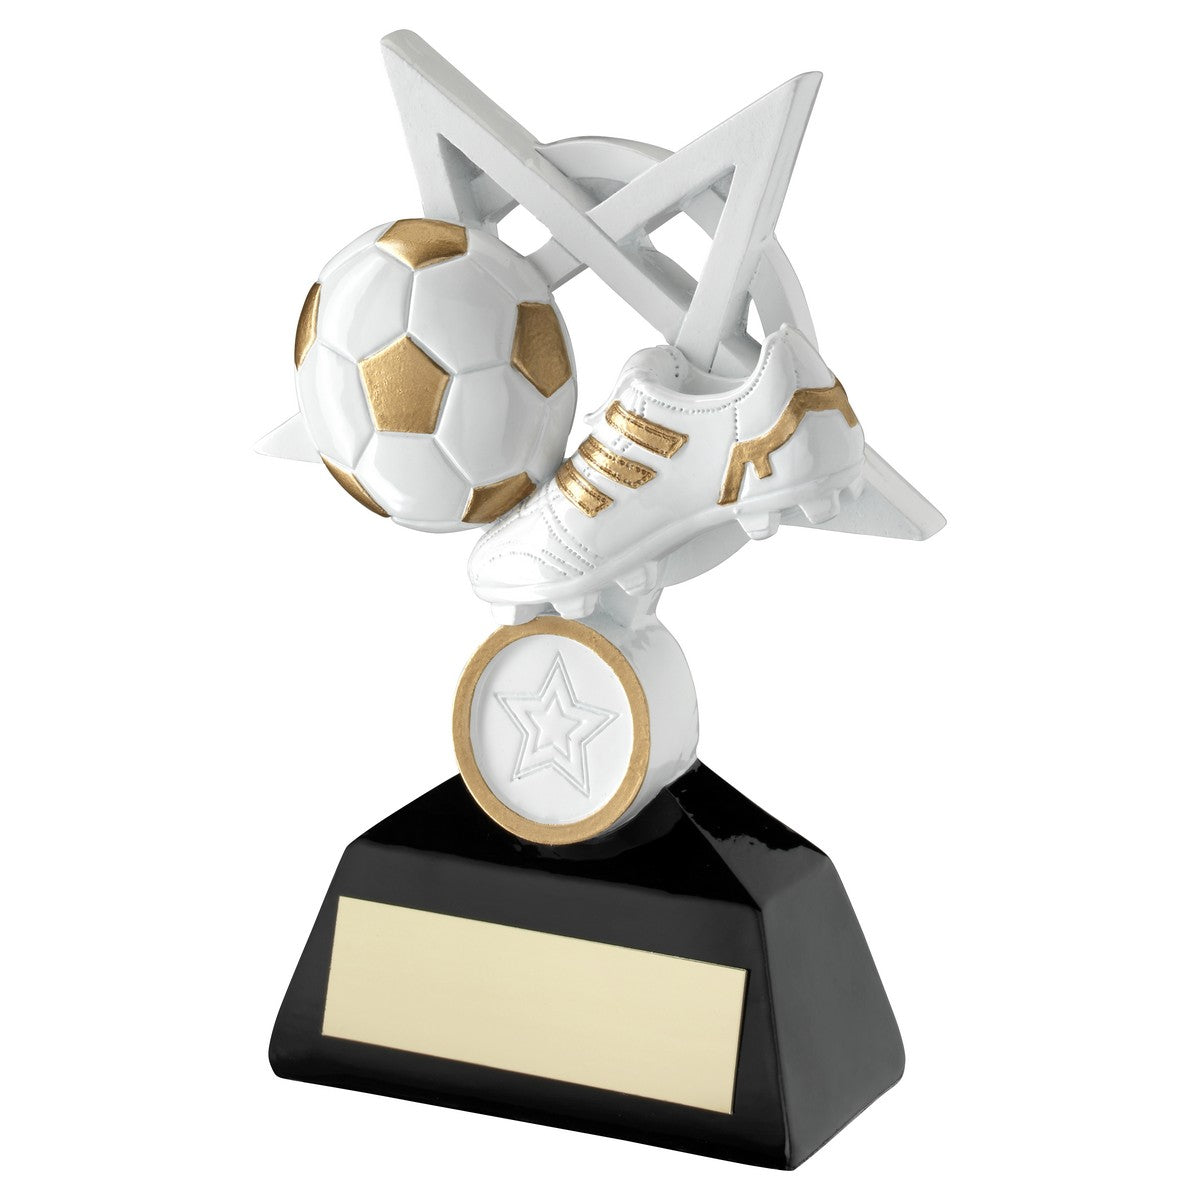 Football And Boot On 5 Point Star Trophy